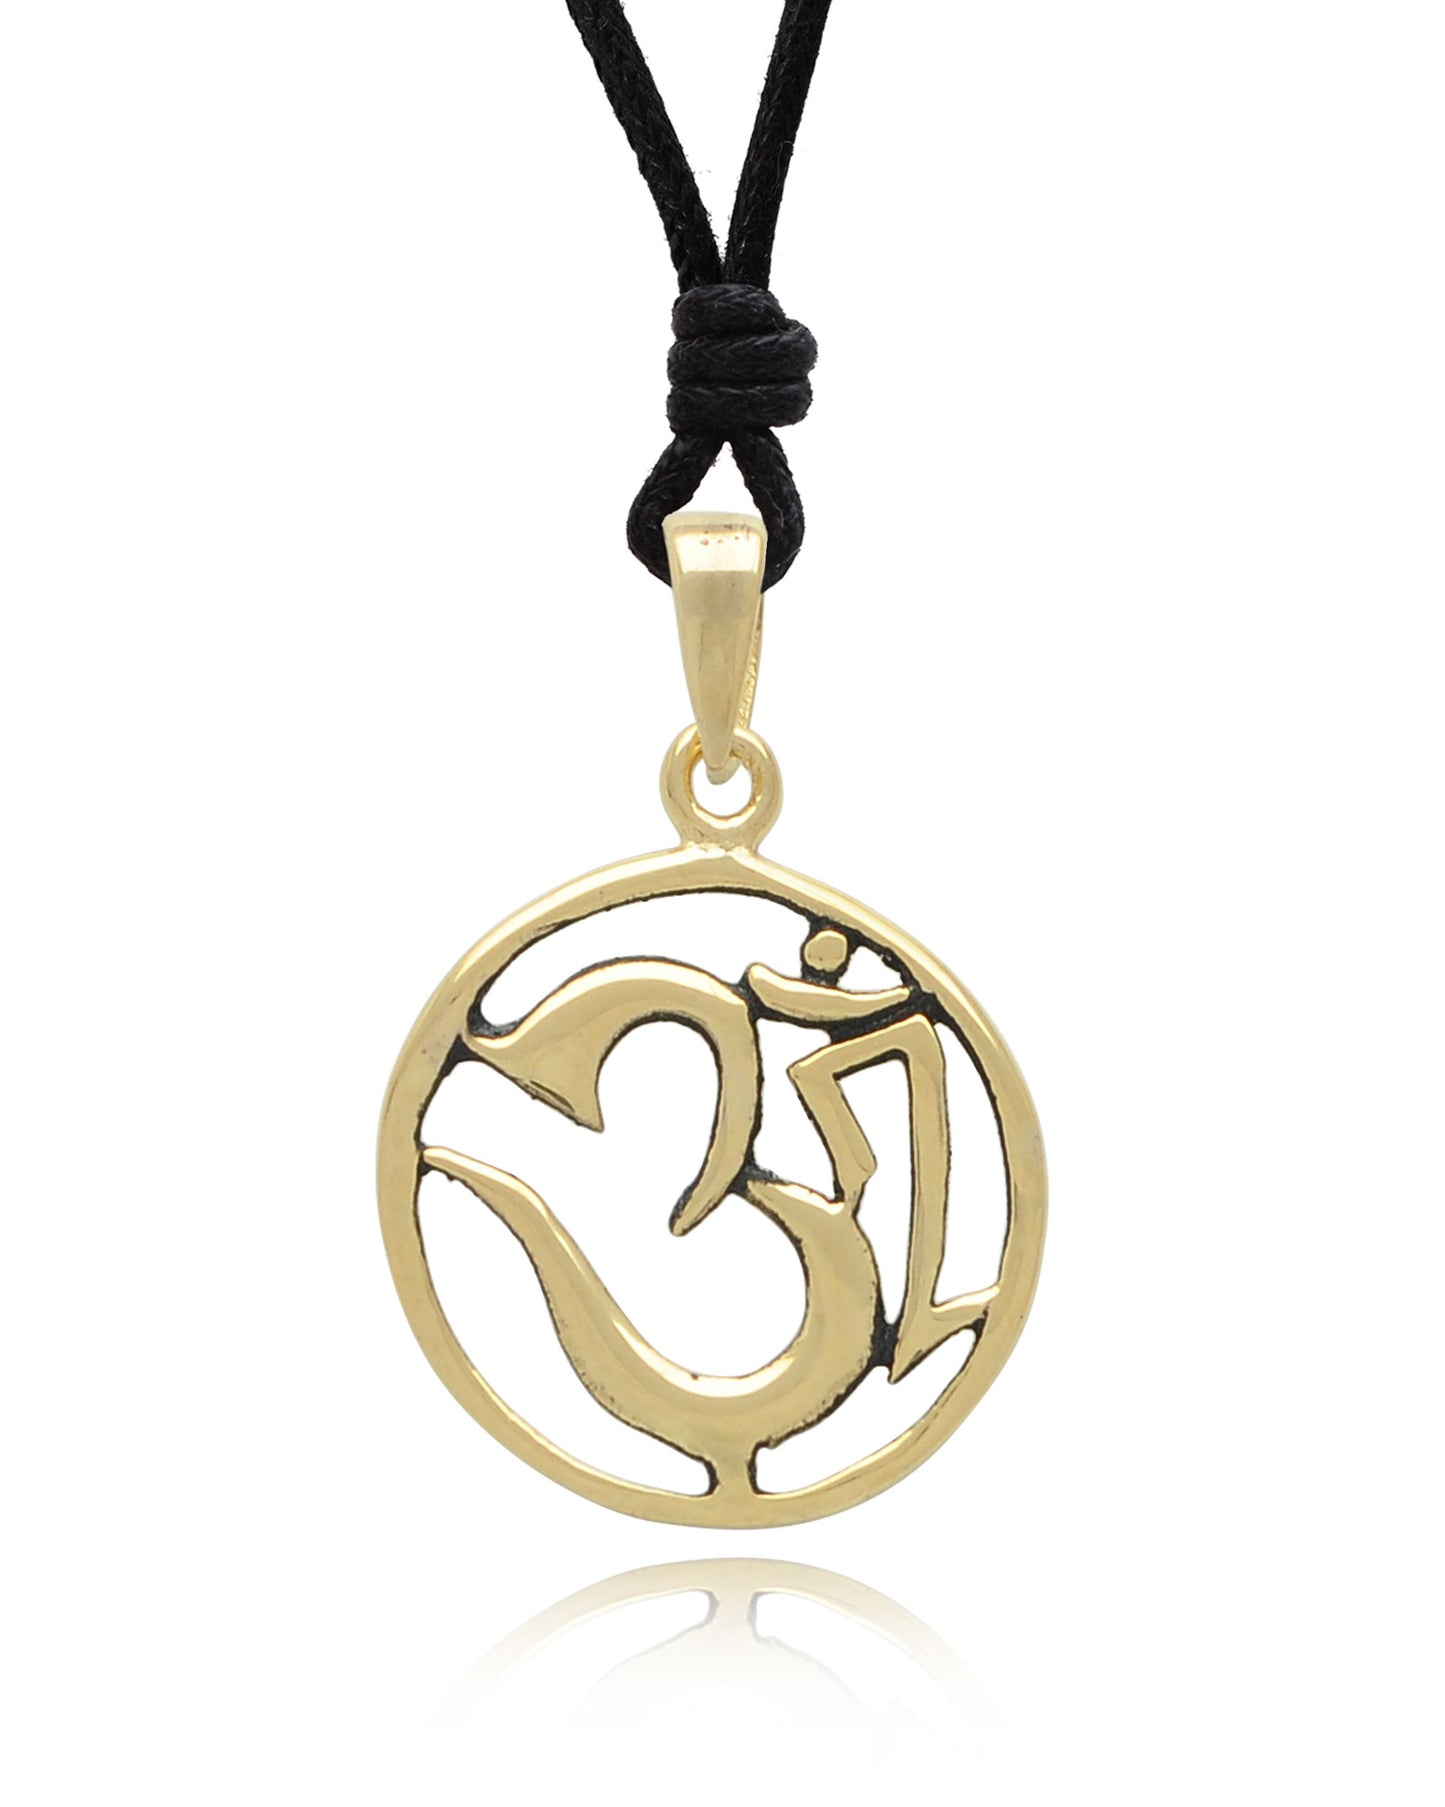 Hindu Aum Ohm Om 92.5 Sterling Silver Pewter Brass Charm Necklace Pendant Jewelry